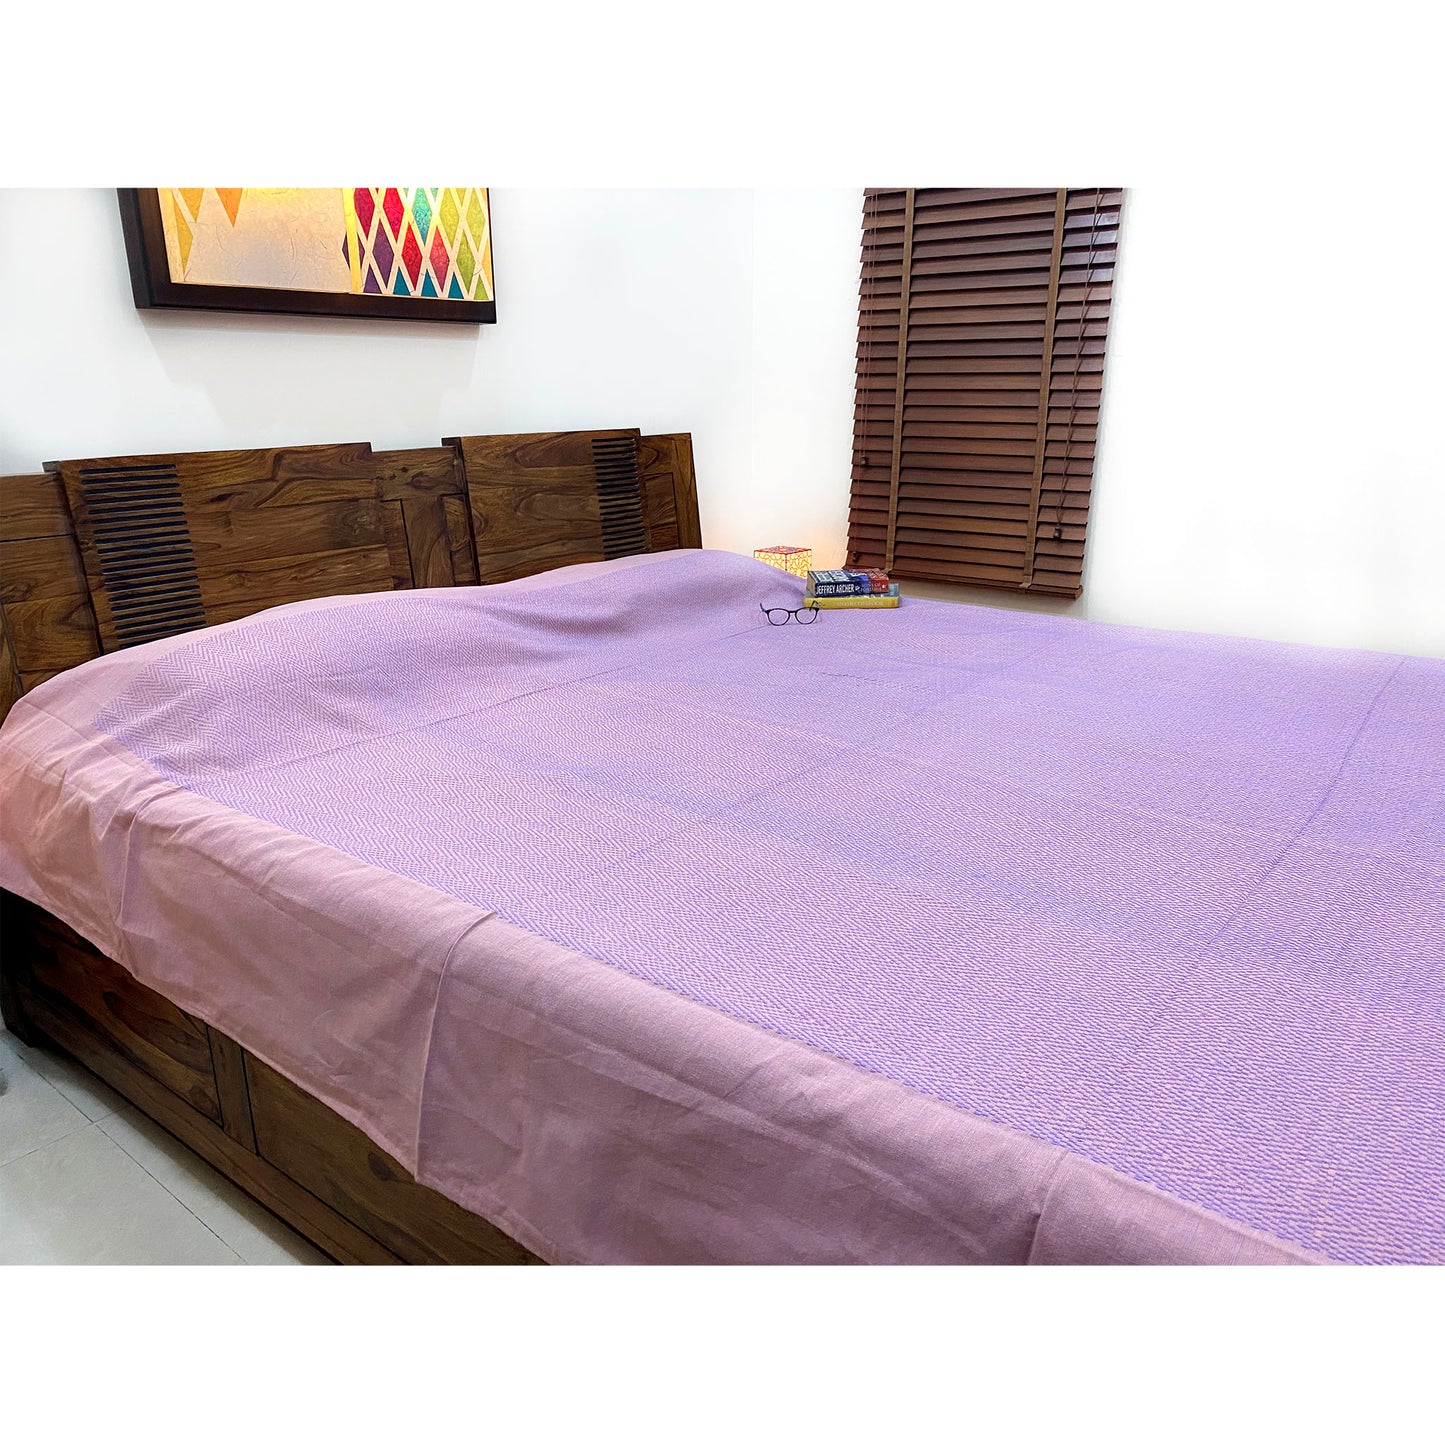 super-king-size-bed-cover-for-sale